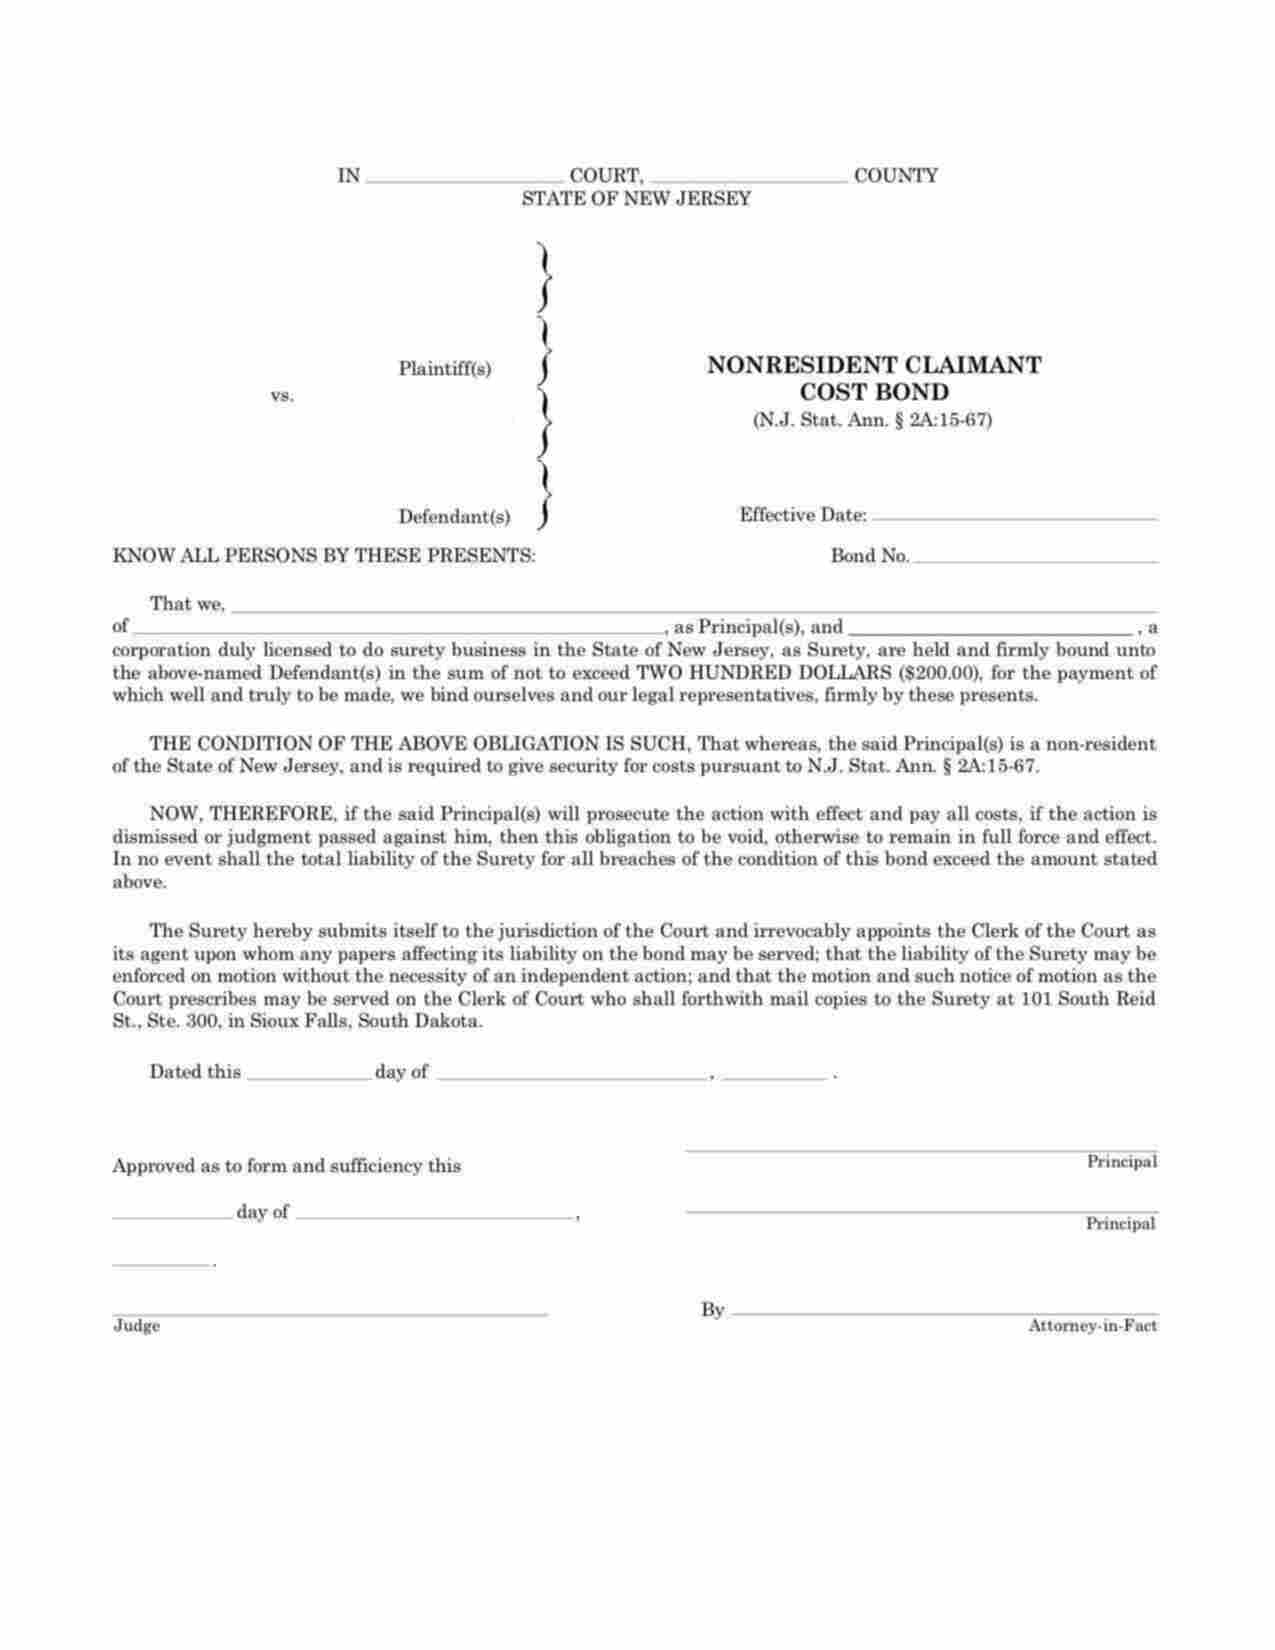 New Jersey Nonresident Claimant Cost Bond Form